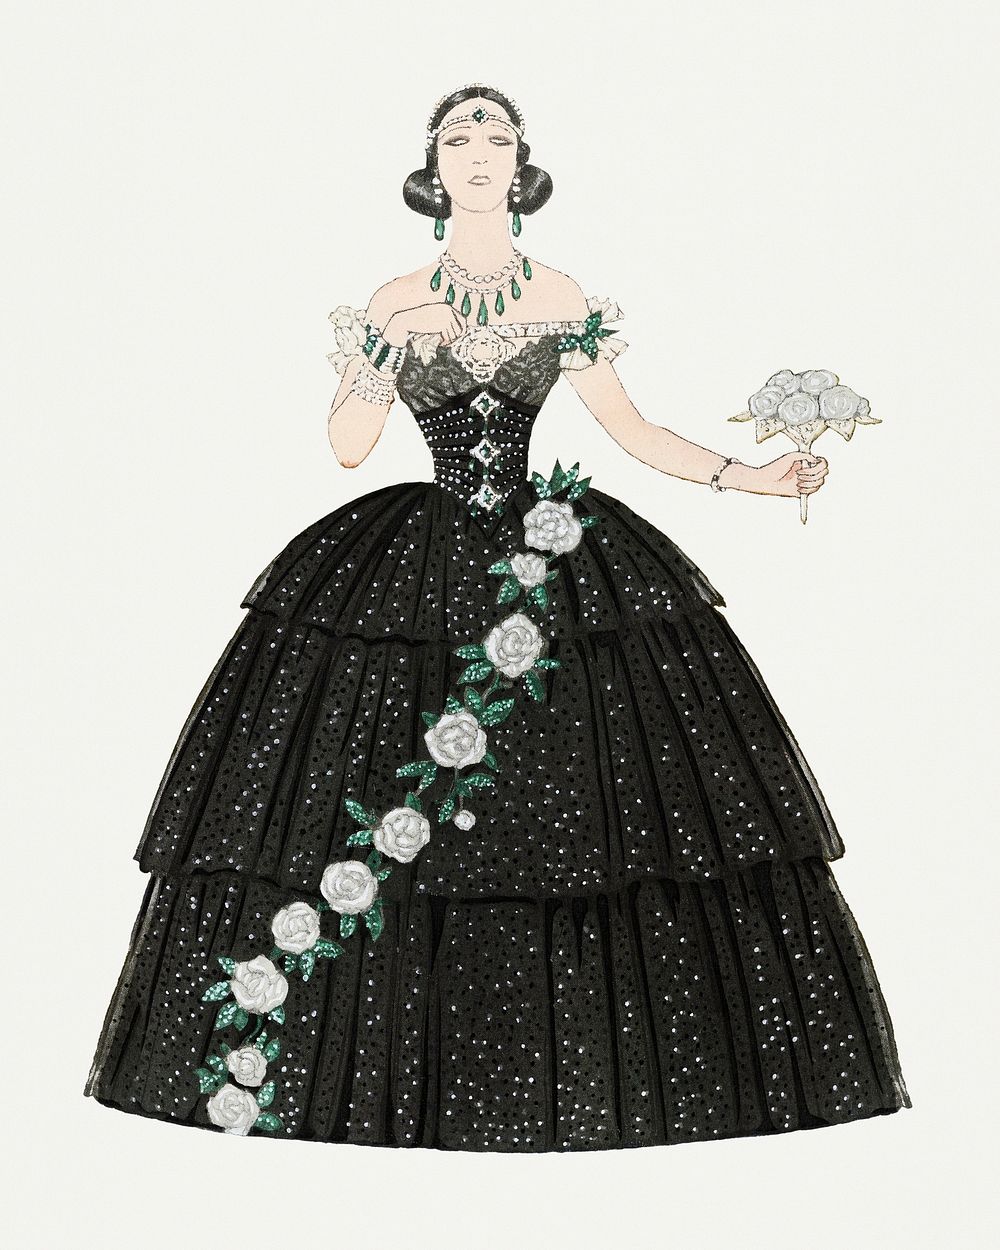 Woman in black Victorian dress 19th century fashion, remix from artworks by George Barbier